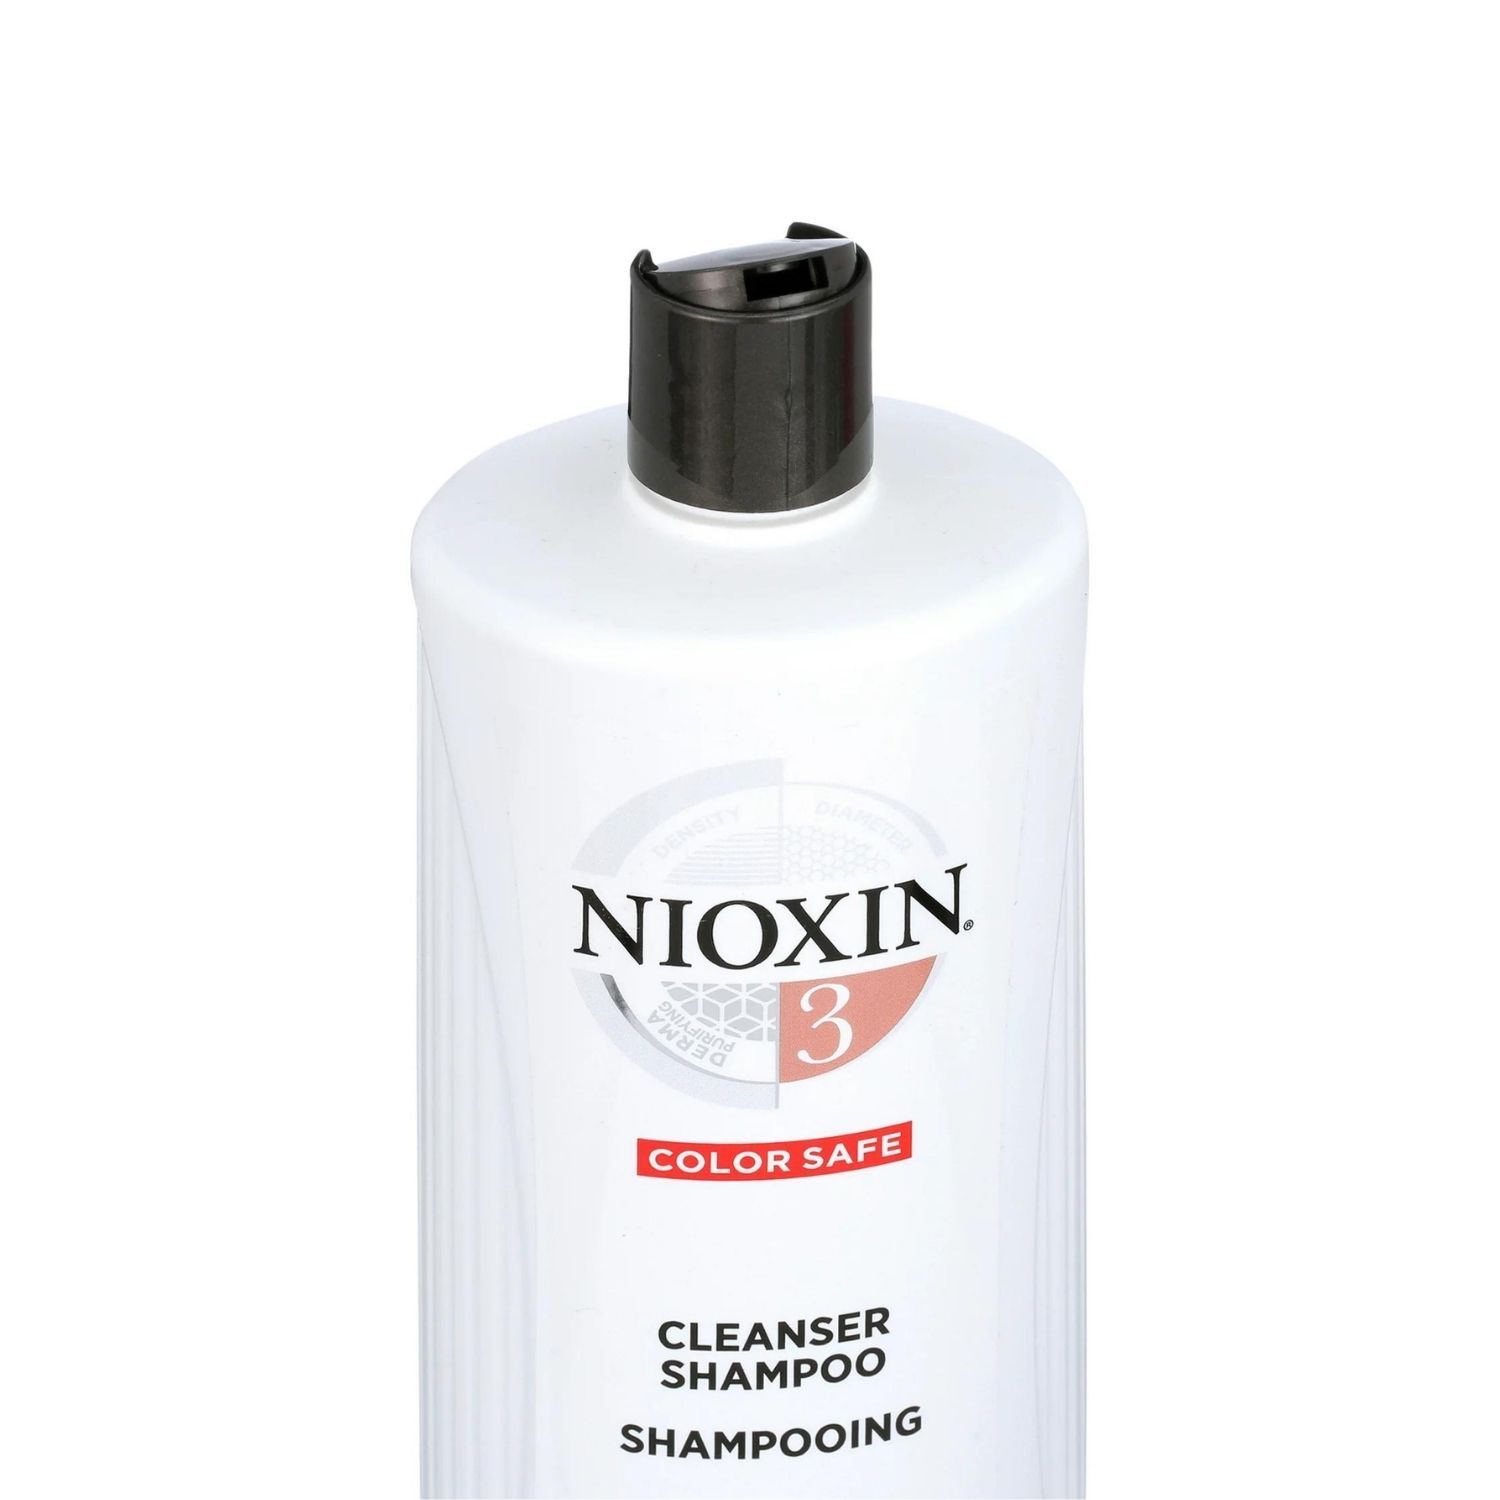 Nioxin System 3 Cleanser Shampoo, for Light Thinning Colored Hair, 33.8 oz - image 4 of 6